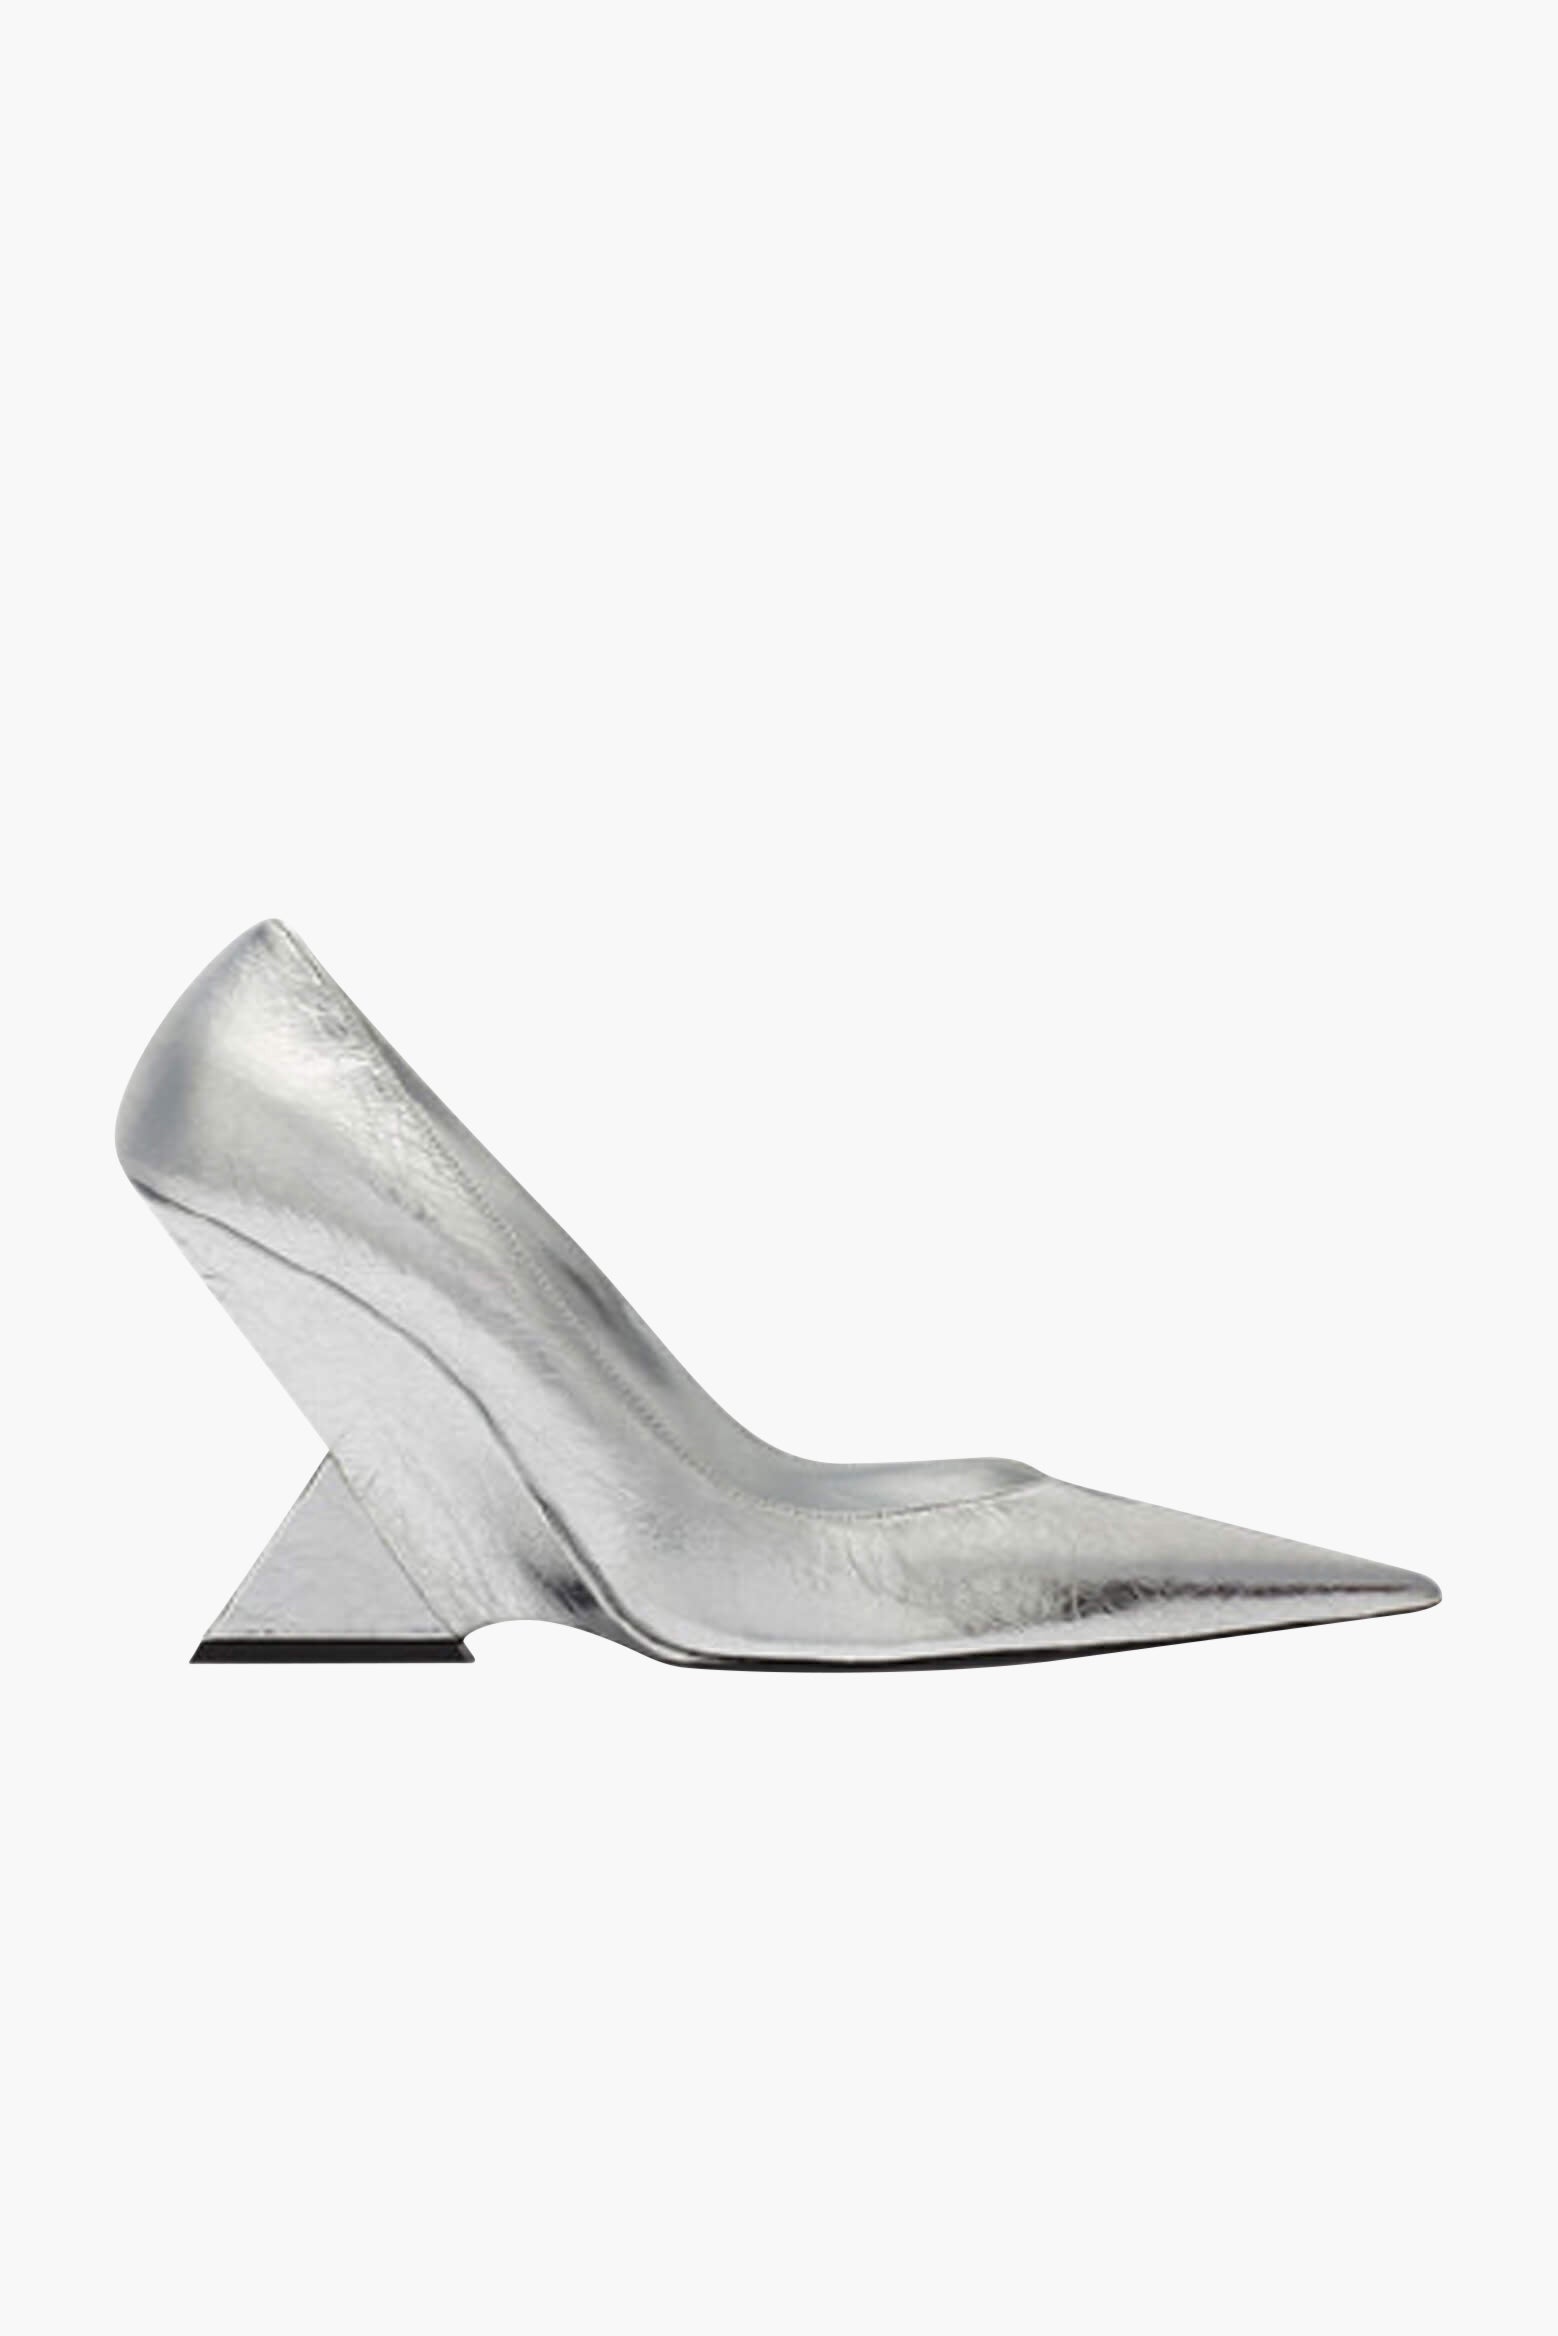 The Attico Cheope Pump in Silver available at TNT The New Trend Australia.